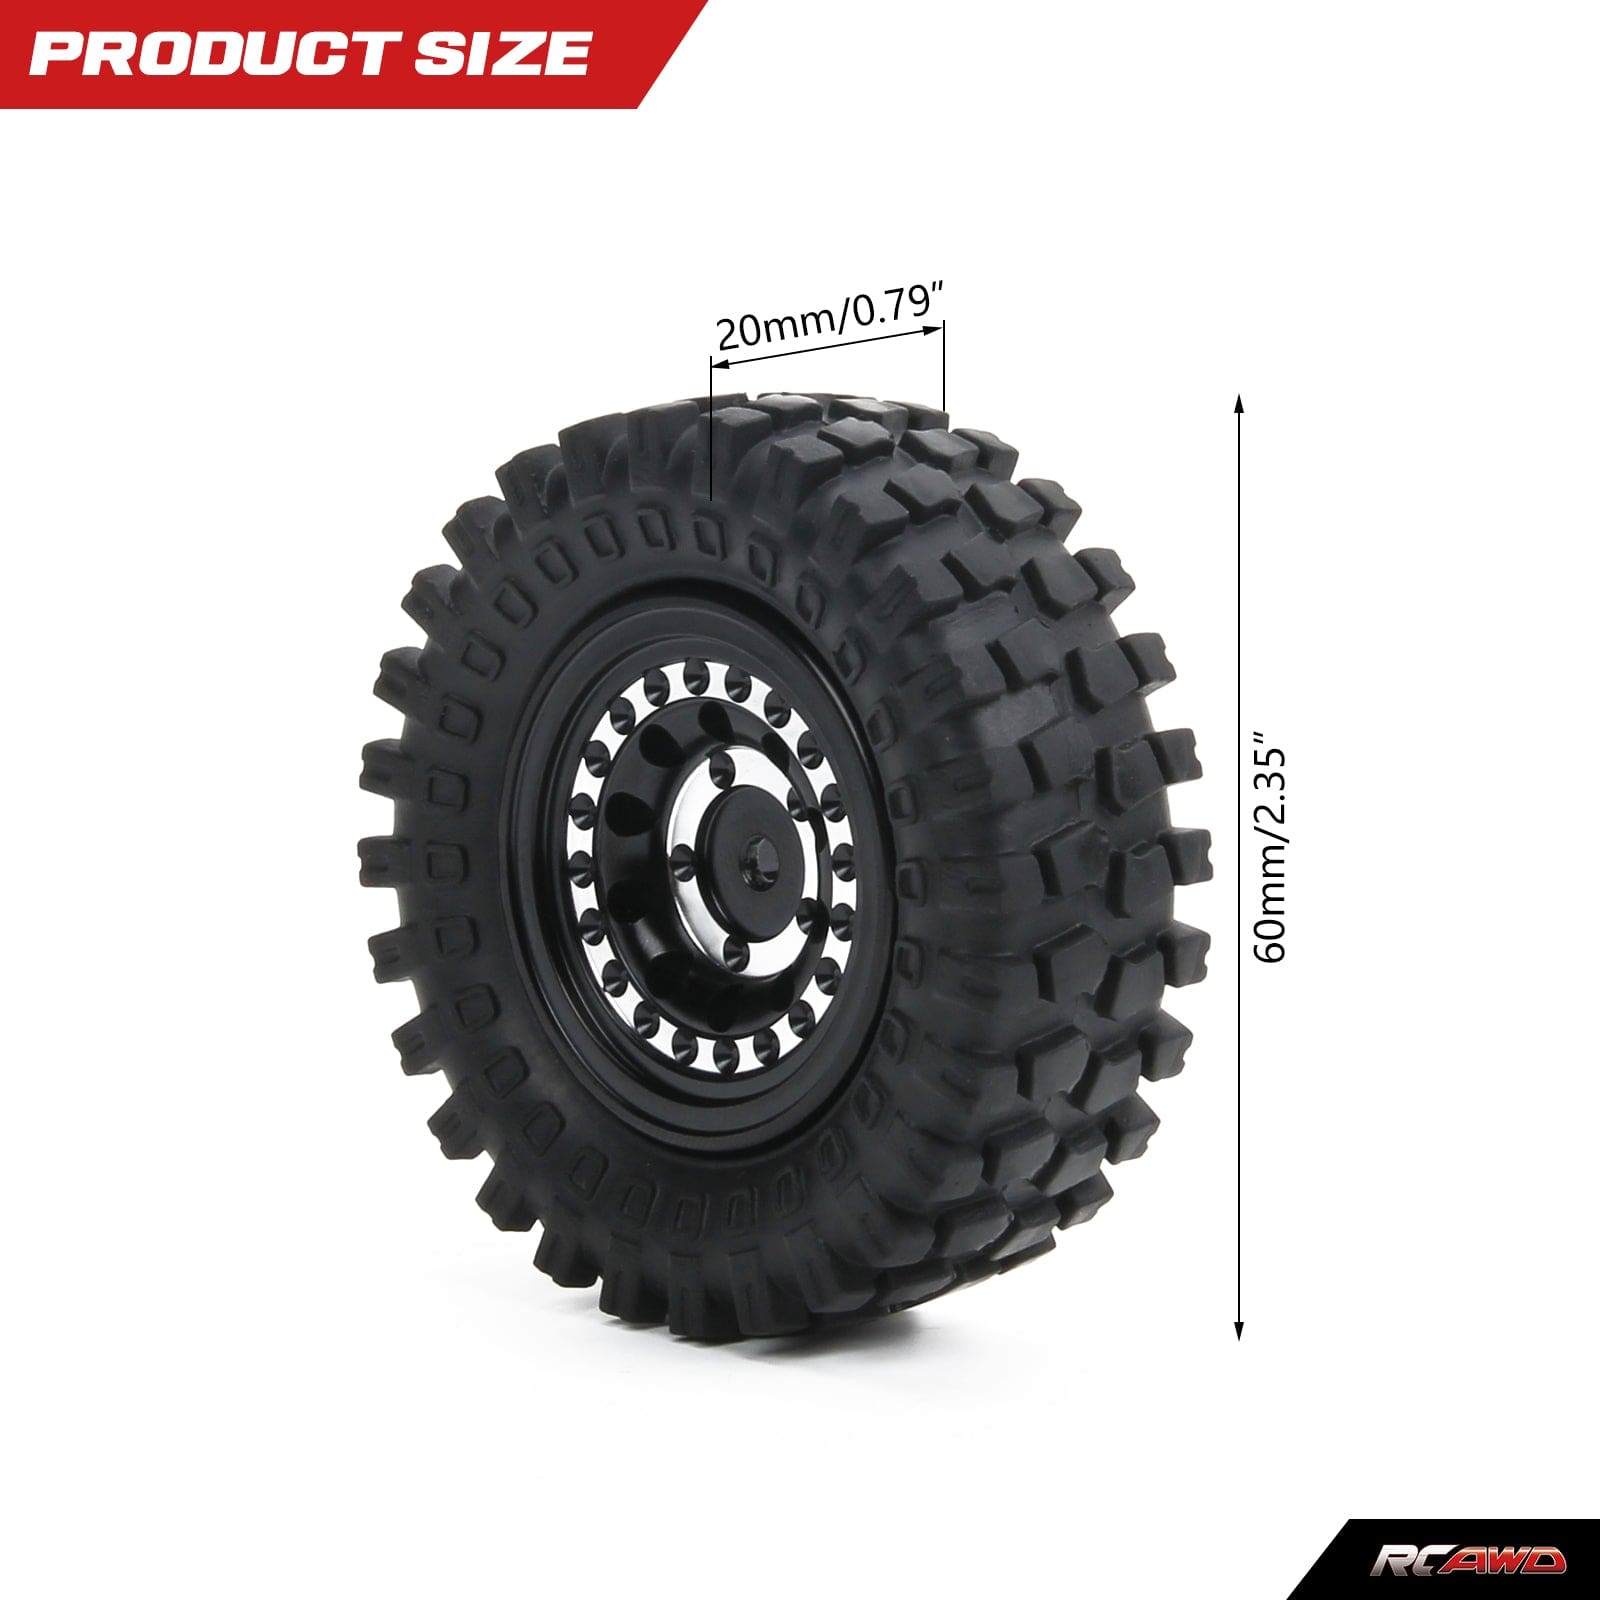 RCAWD FMS FCX24 RCAWD 60*20mm Full Alloy 1.3" Beadlock Glue-free Wheel Tire Set for FMS FCX24 and SCX24 Crawlers